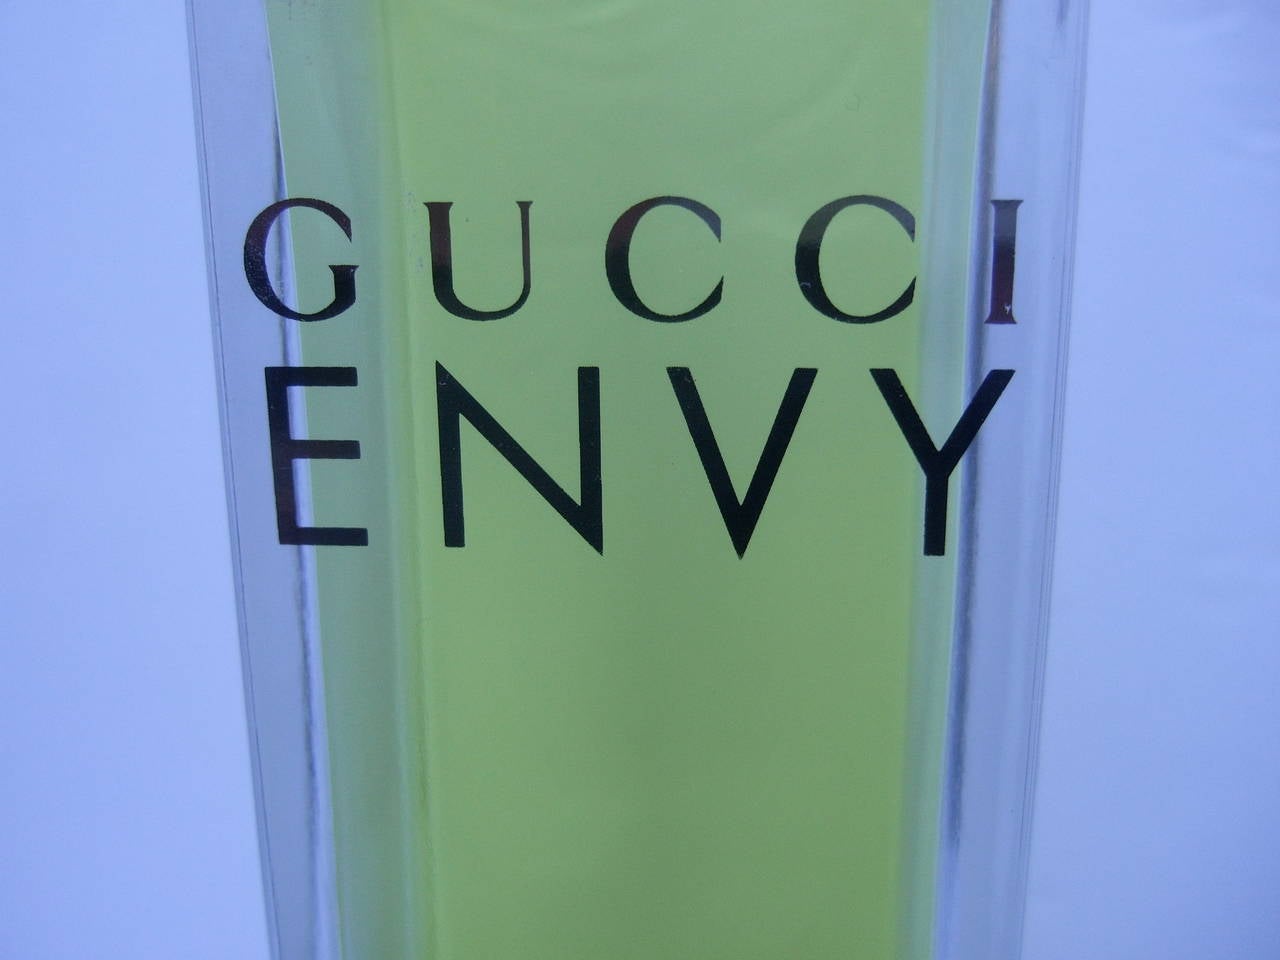 Gucci Sleek large factice display bottle
The large scale streamlined bottle is a replica of Gucci's "Envy" fragrance
The mock fragrance bottle makes a stylish decoration placed on a vanity or dressing room

The large scale replica